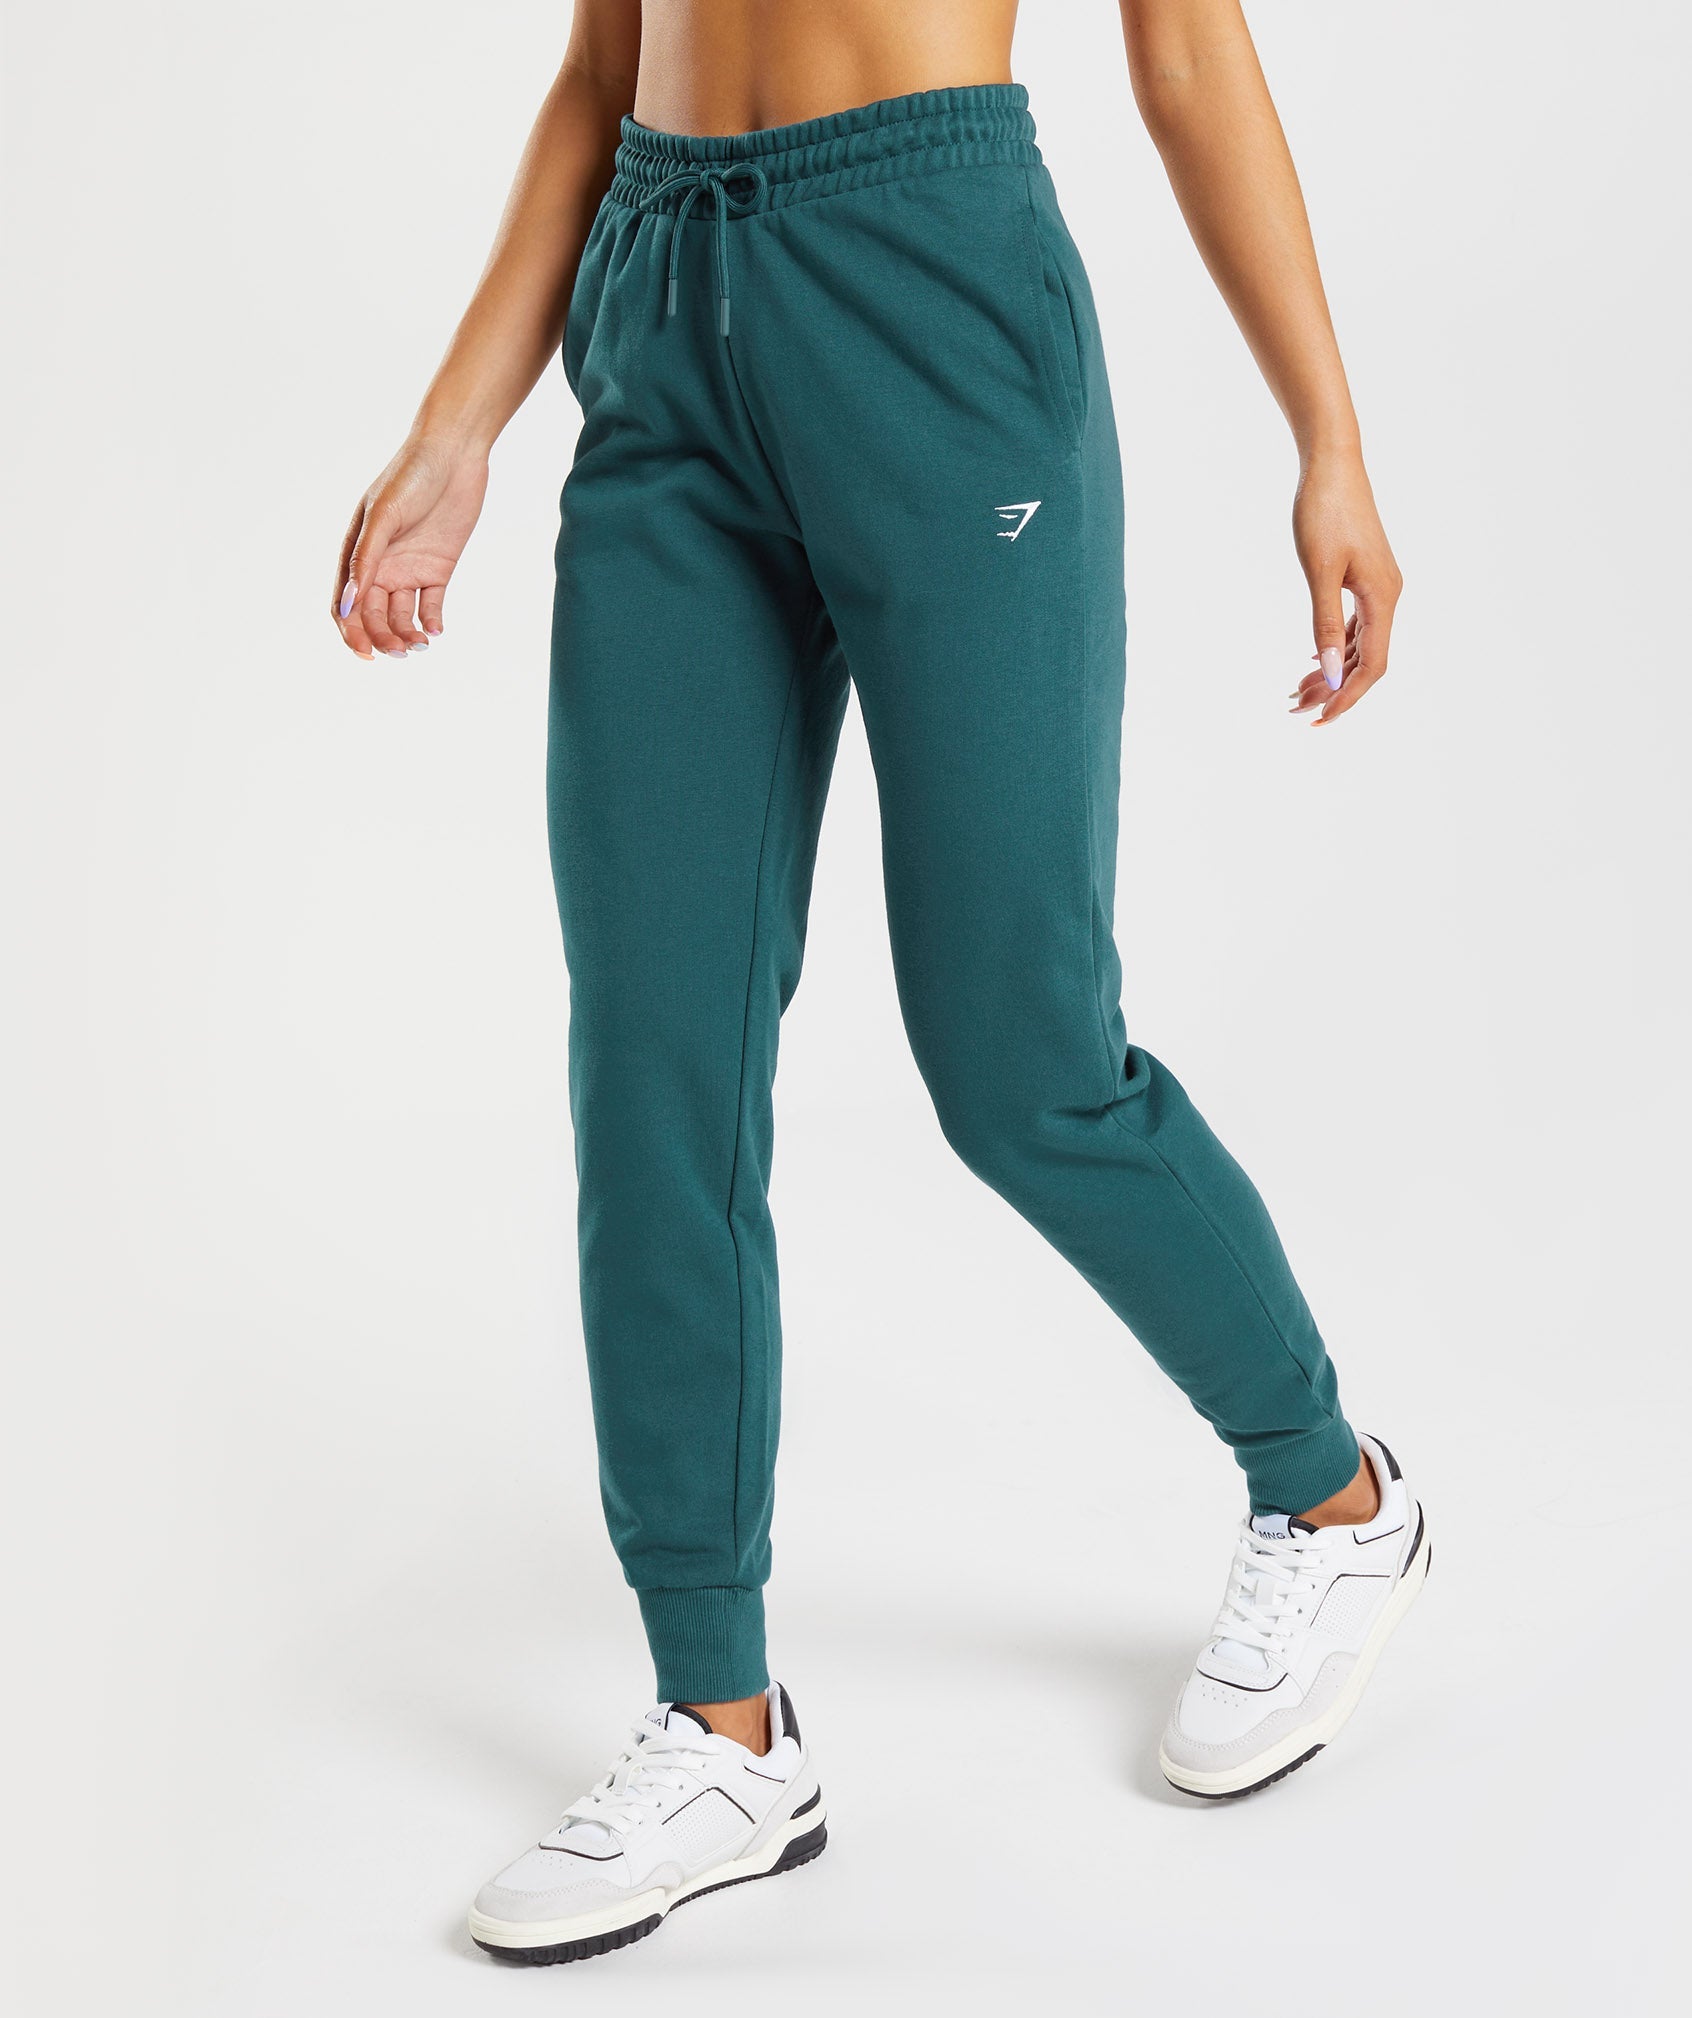 Training Joggers in Winter Teal - view 1